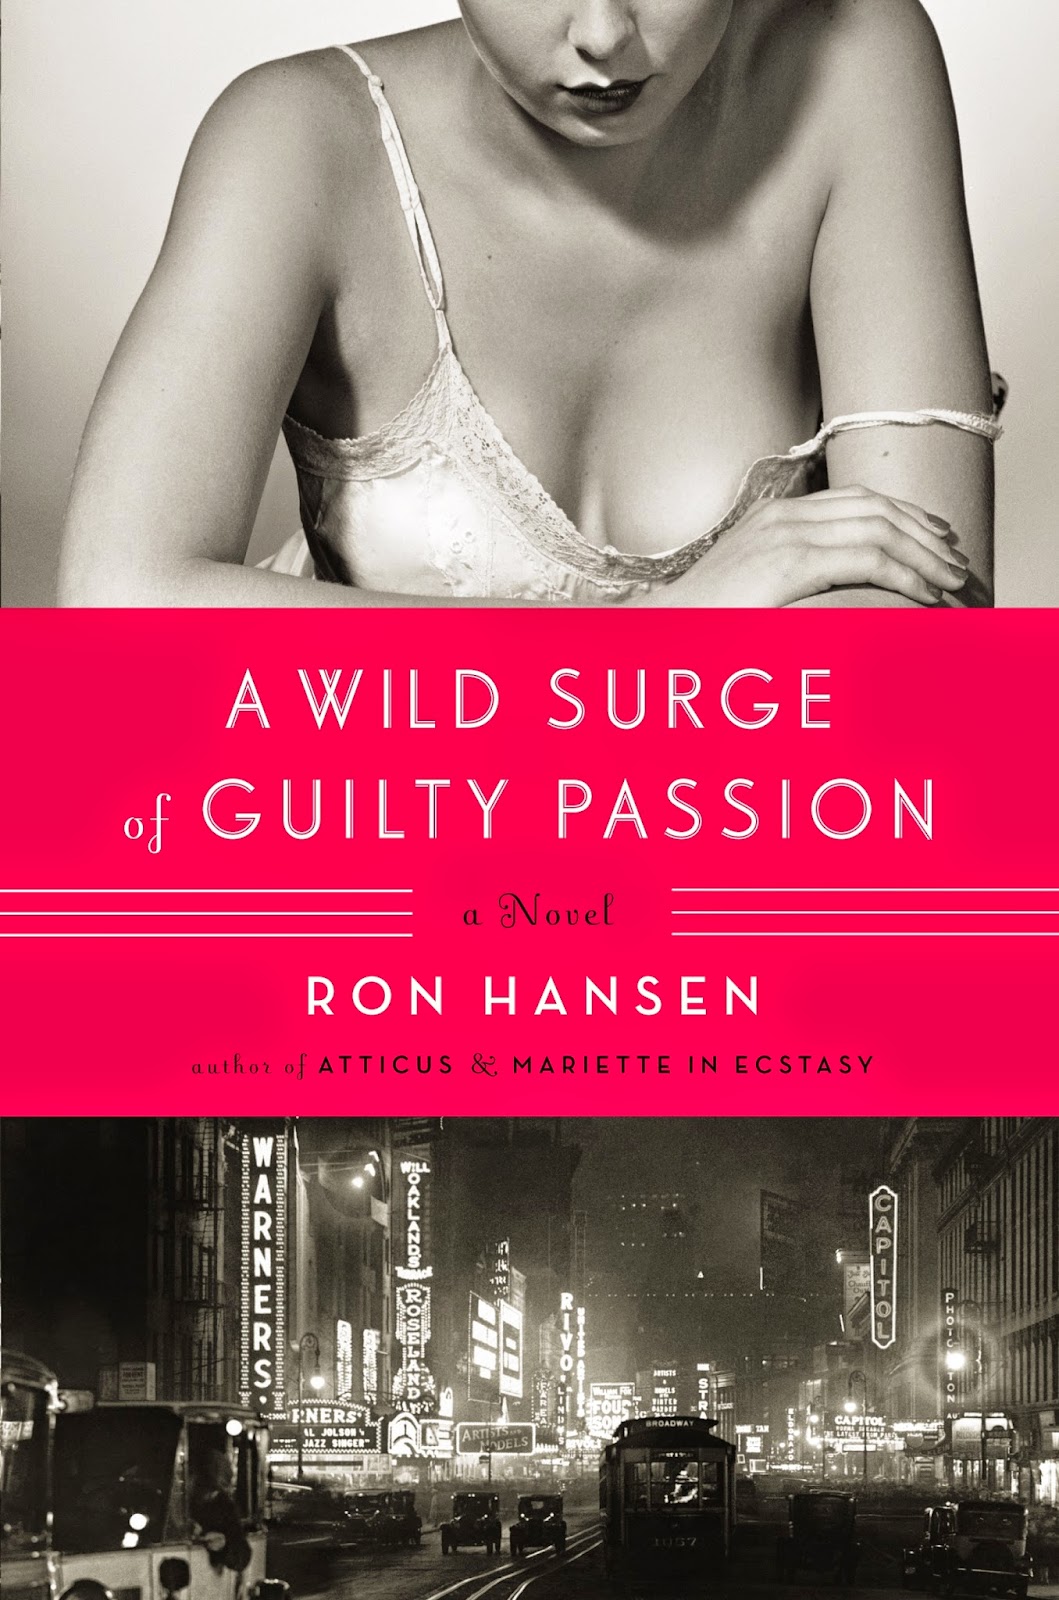 http://discover.halifaxpubliclibraries.ca/?q=title:wild surge of guilty passion